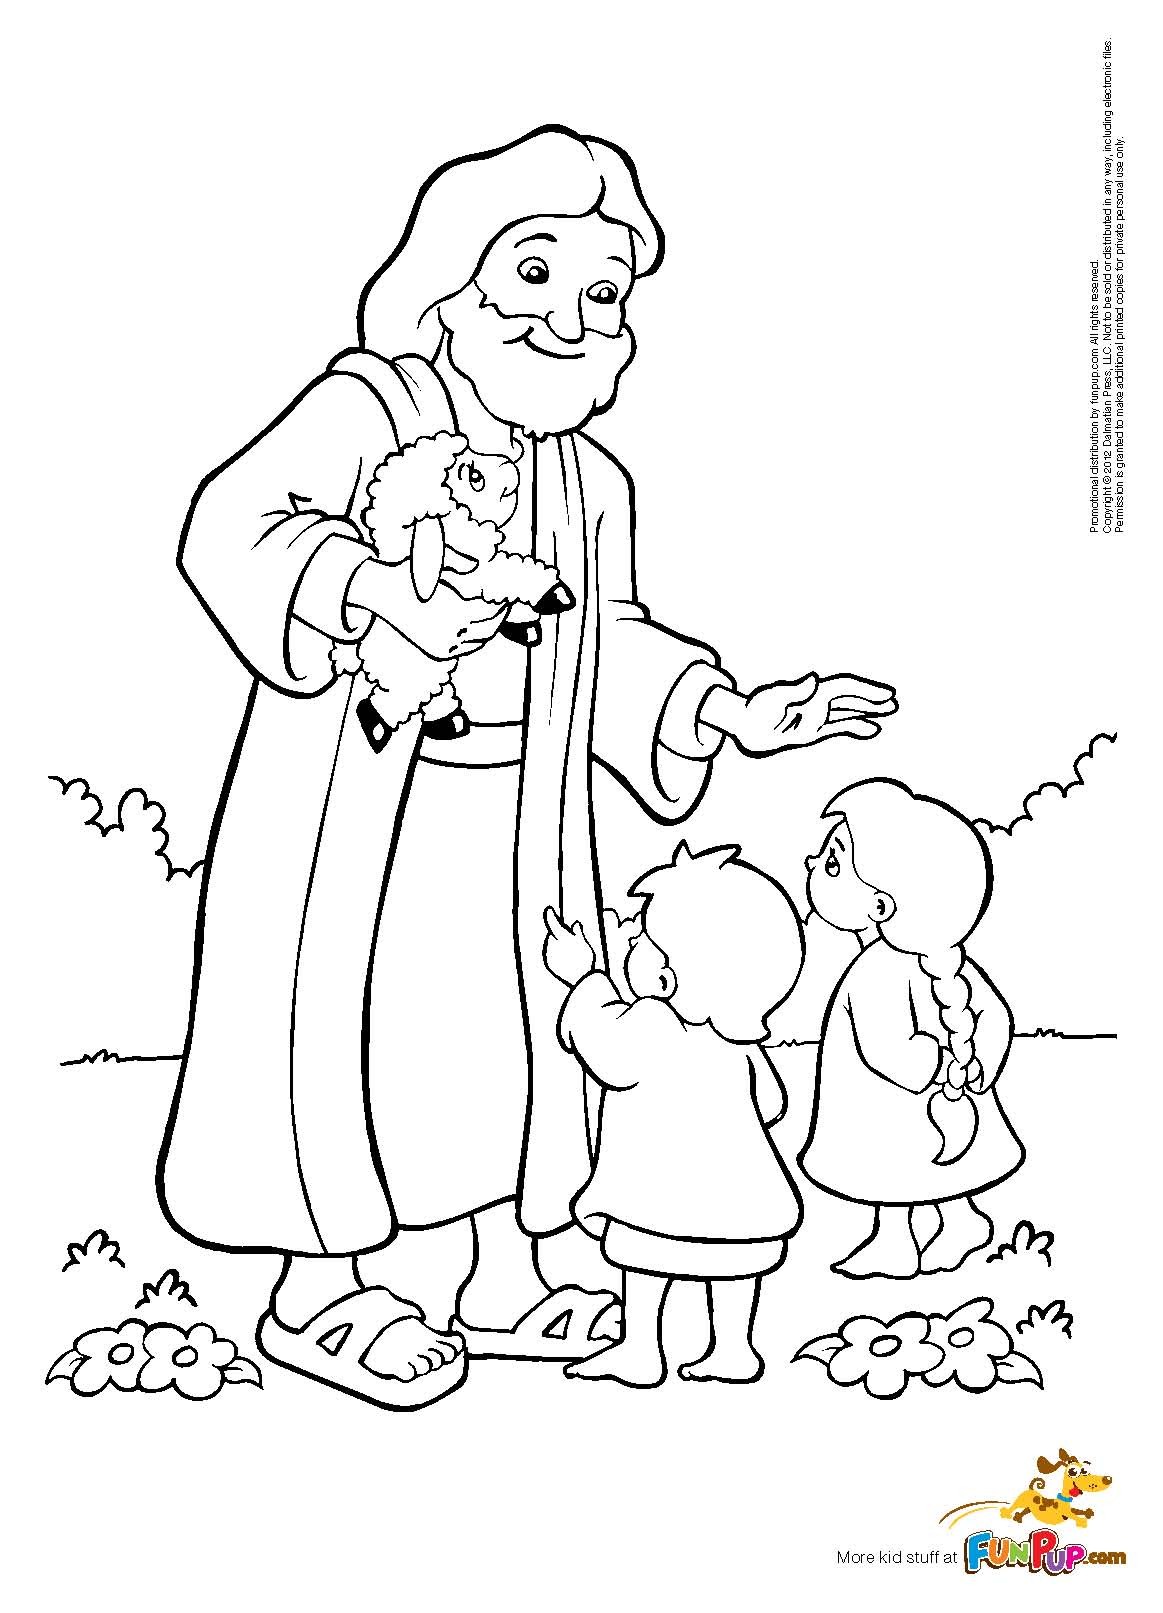 Lds Christmas Coloring Pages at GetColorings.com | Free ...